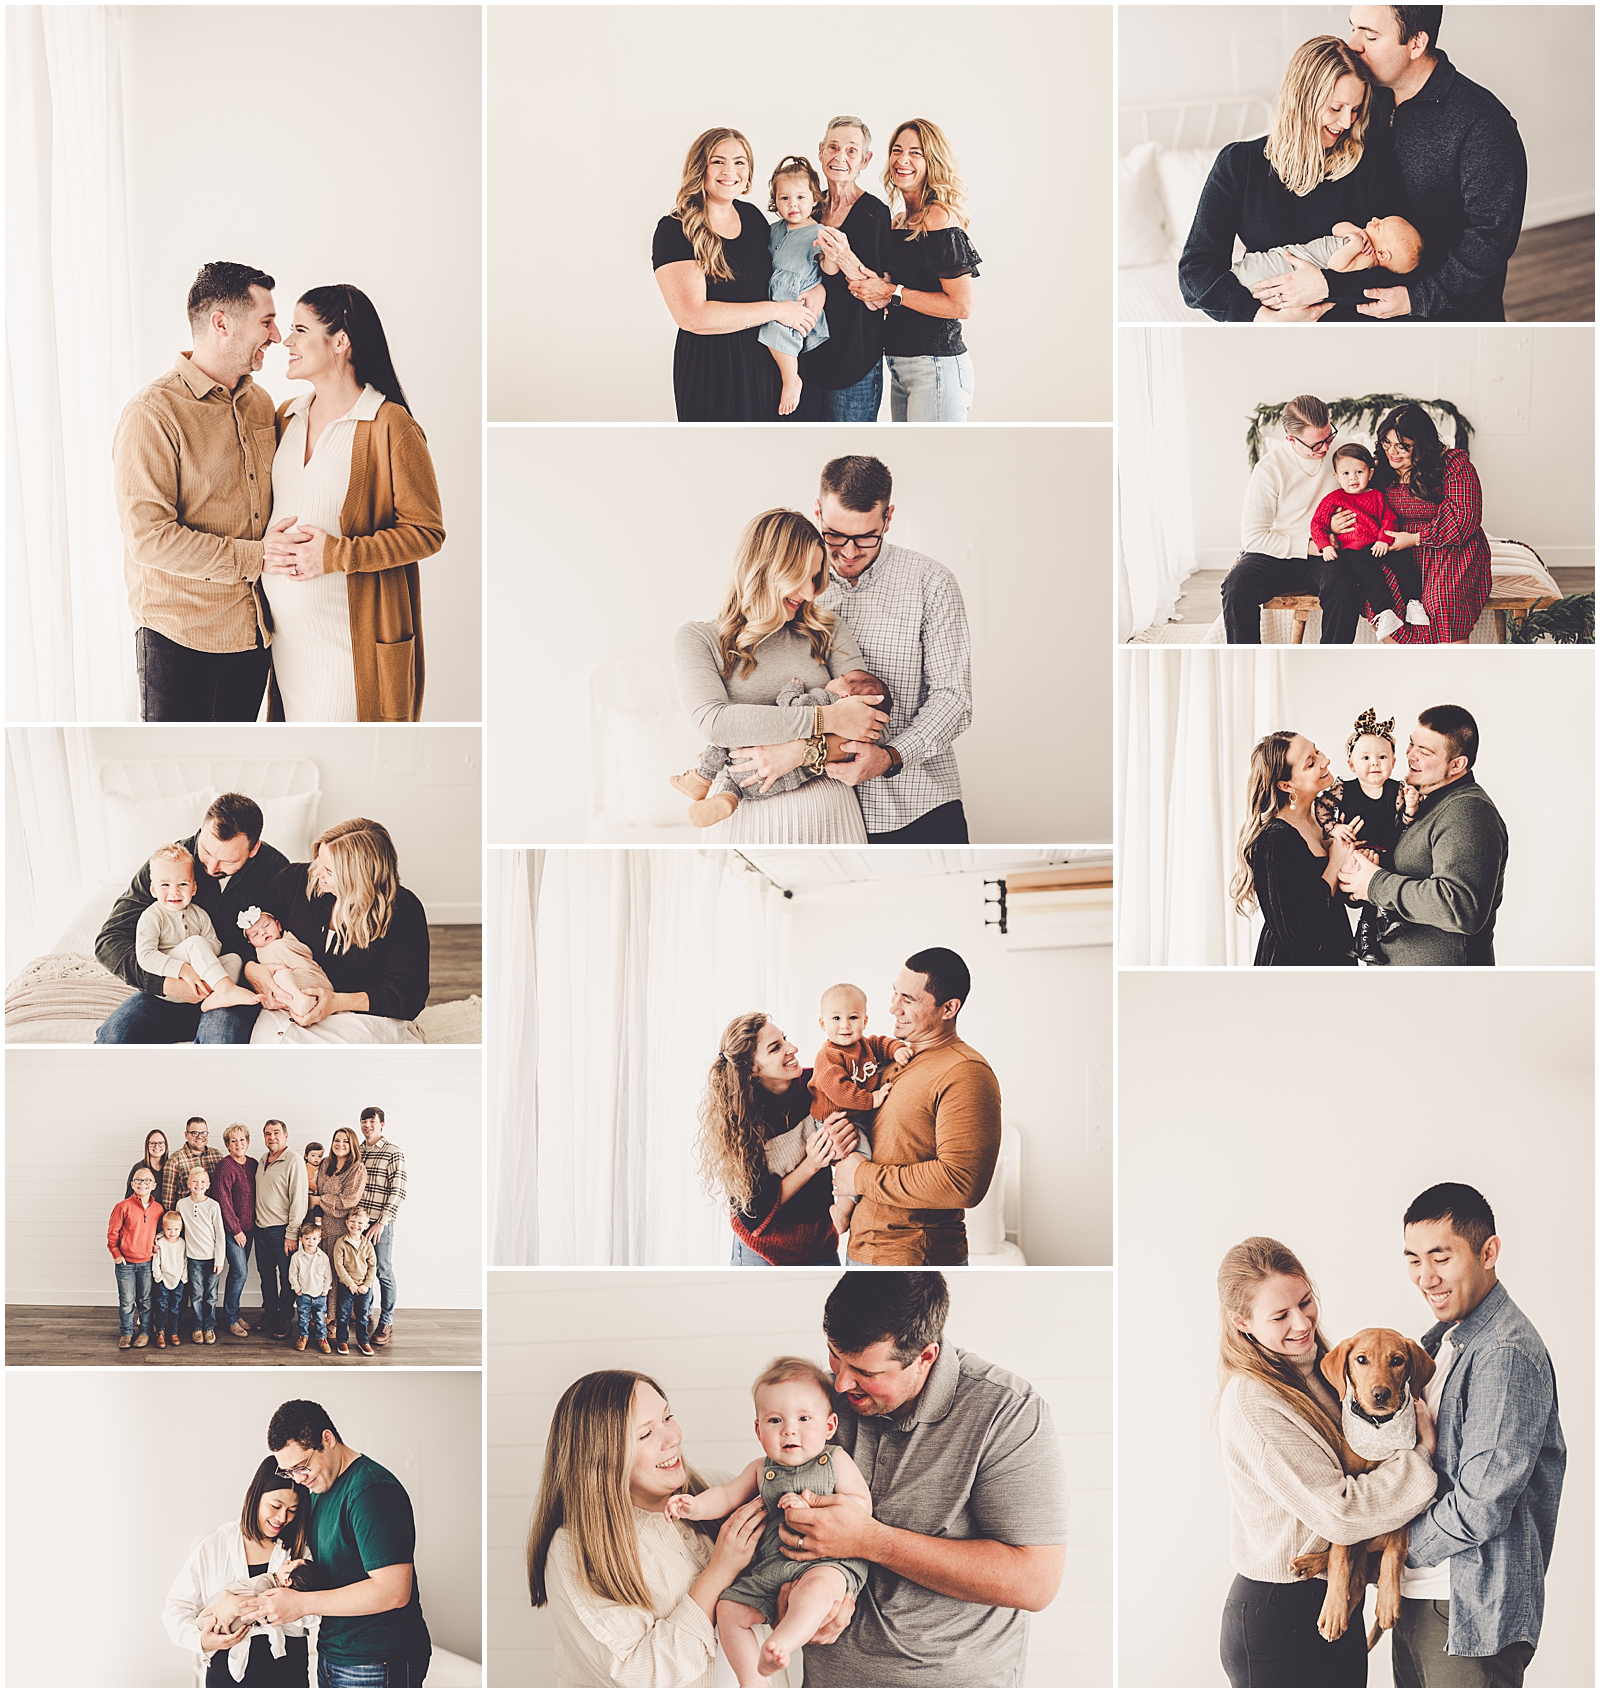 Kankakee County family photographer Kara Evans Photographer's recap of 2023 sessions in Kankakee County, Iroquois County, and Chicagoland.